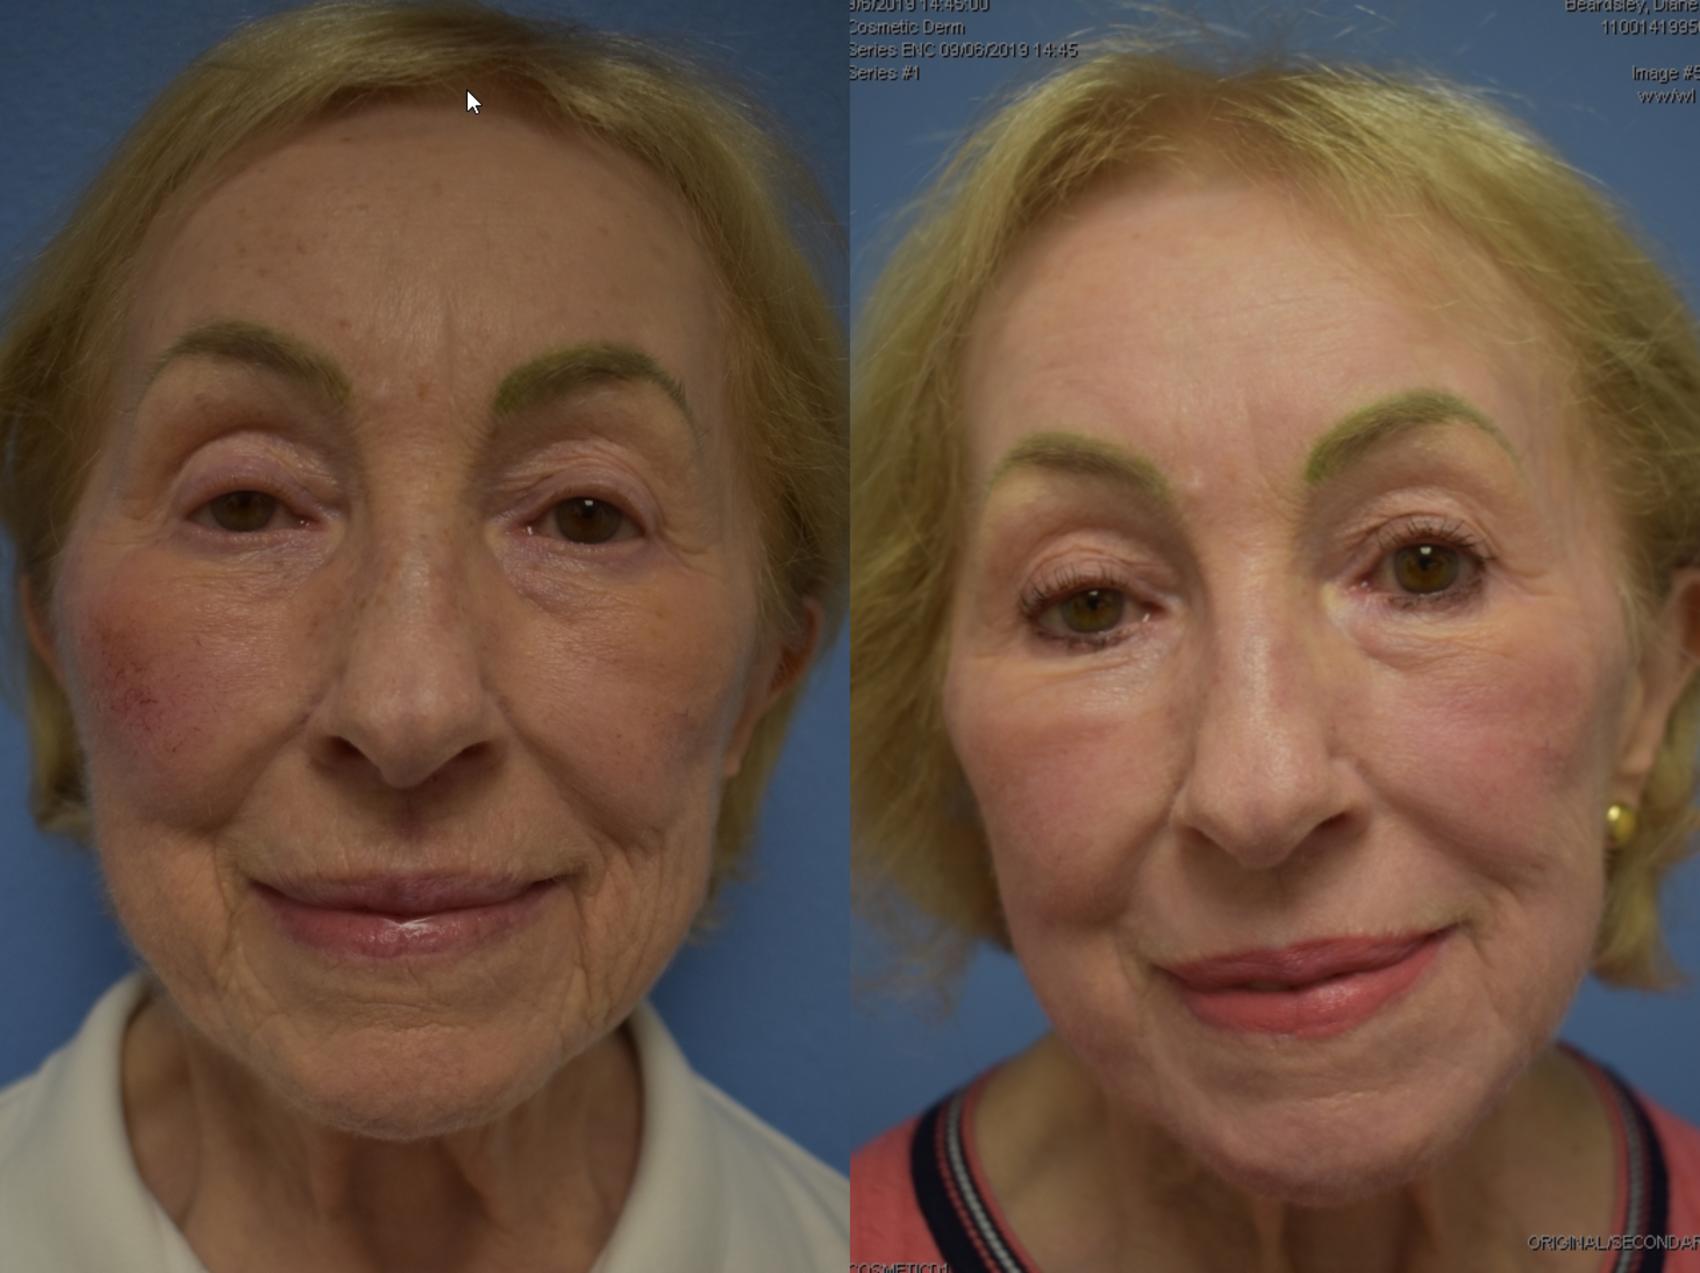 CO2 laser resurfacing Before & After Photo | San Francisco, CA | Kaiser Permanente Cosmetic Services